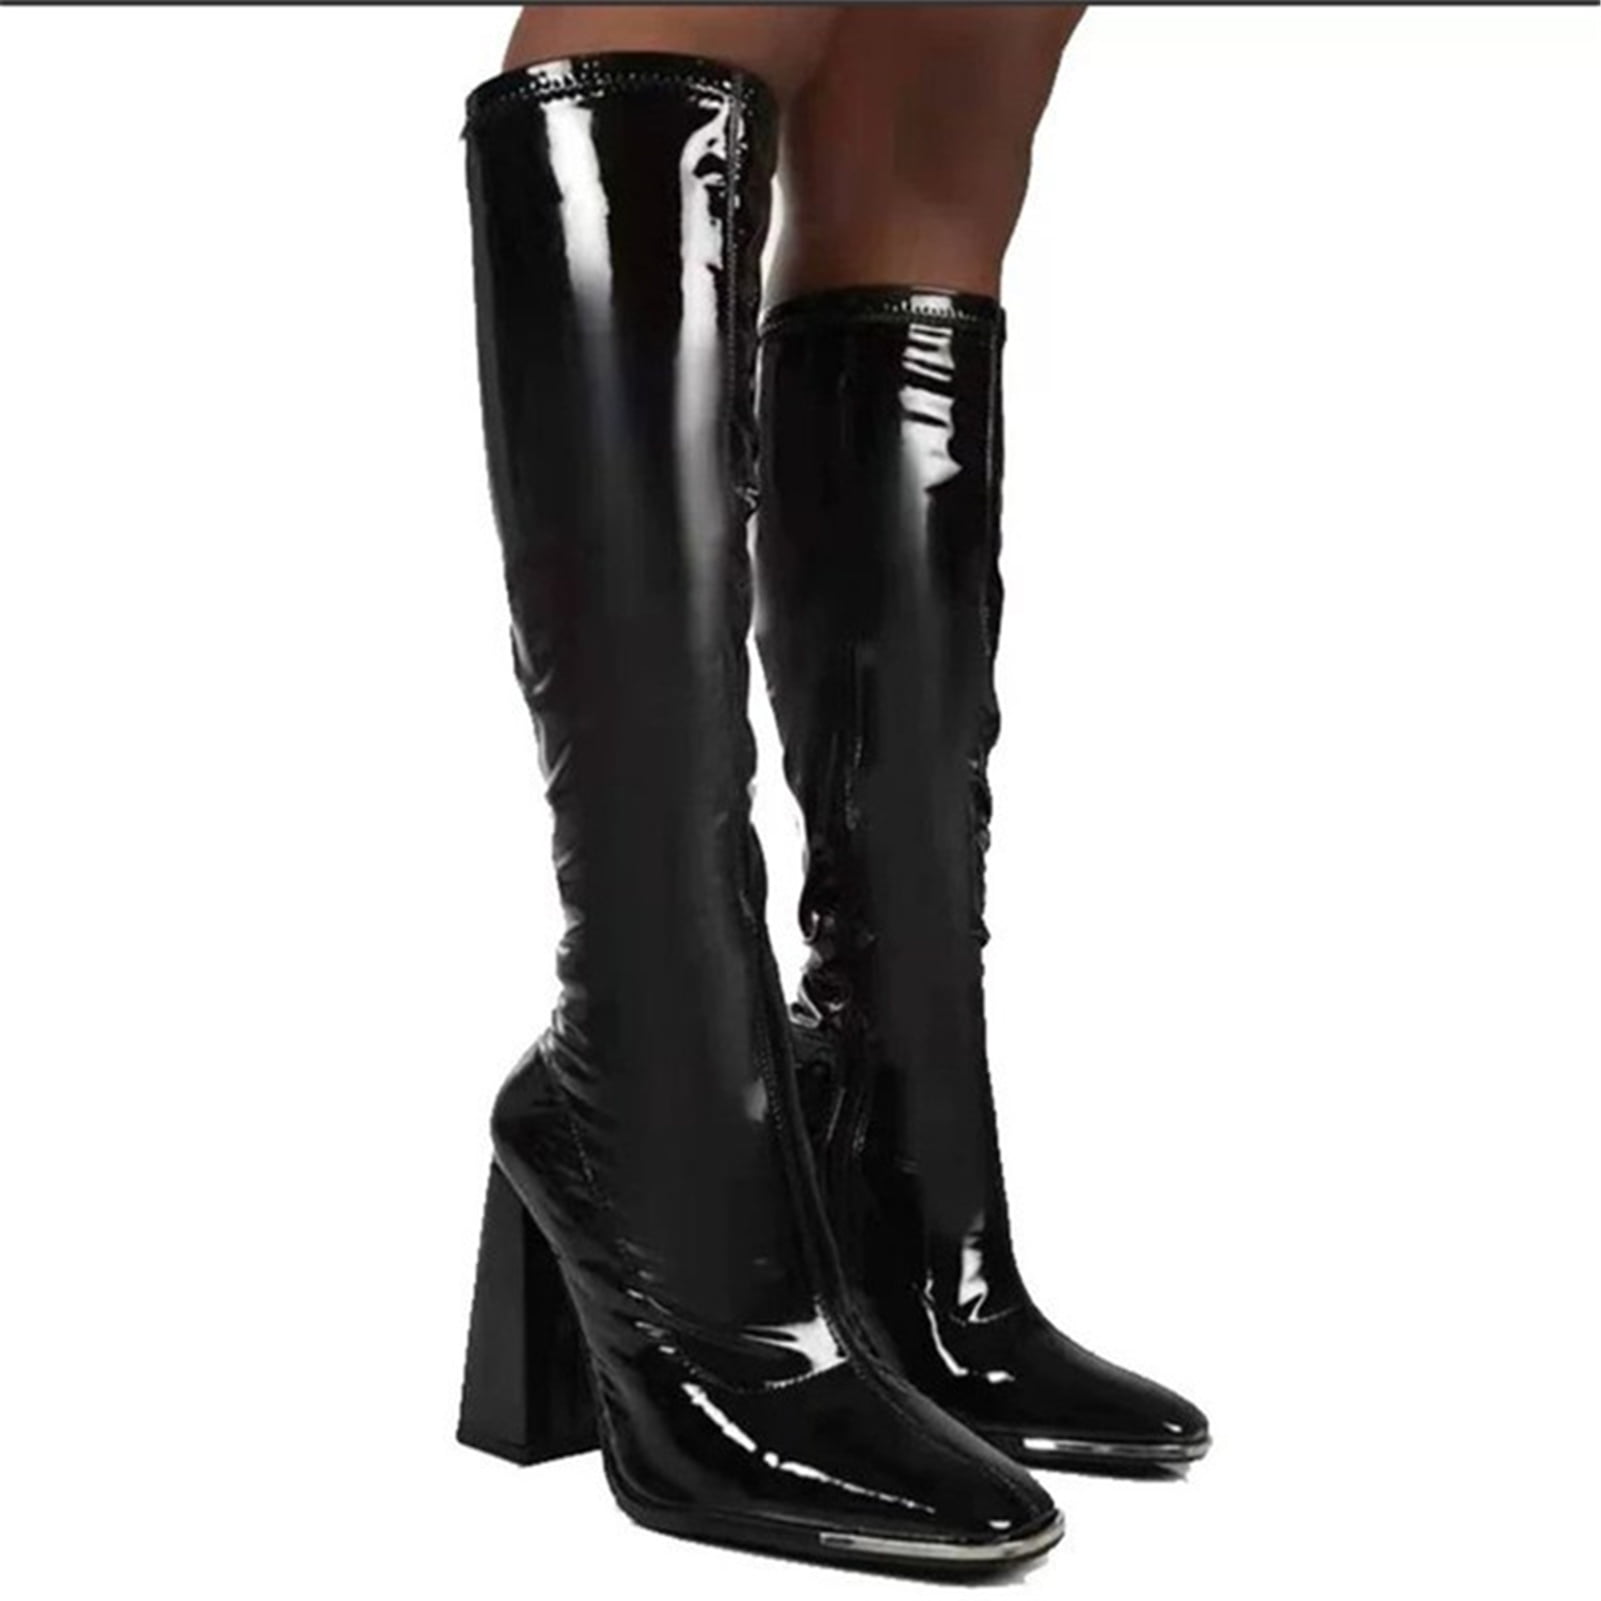 Details about   New Stylish Womens Over the Knee High Heels Party pointed Stretchy Pull On Boot